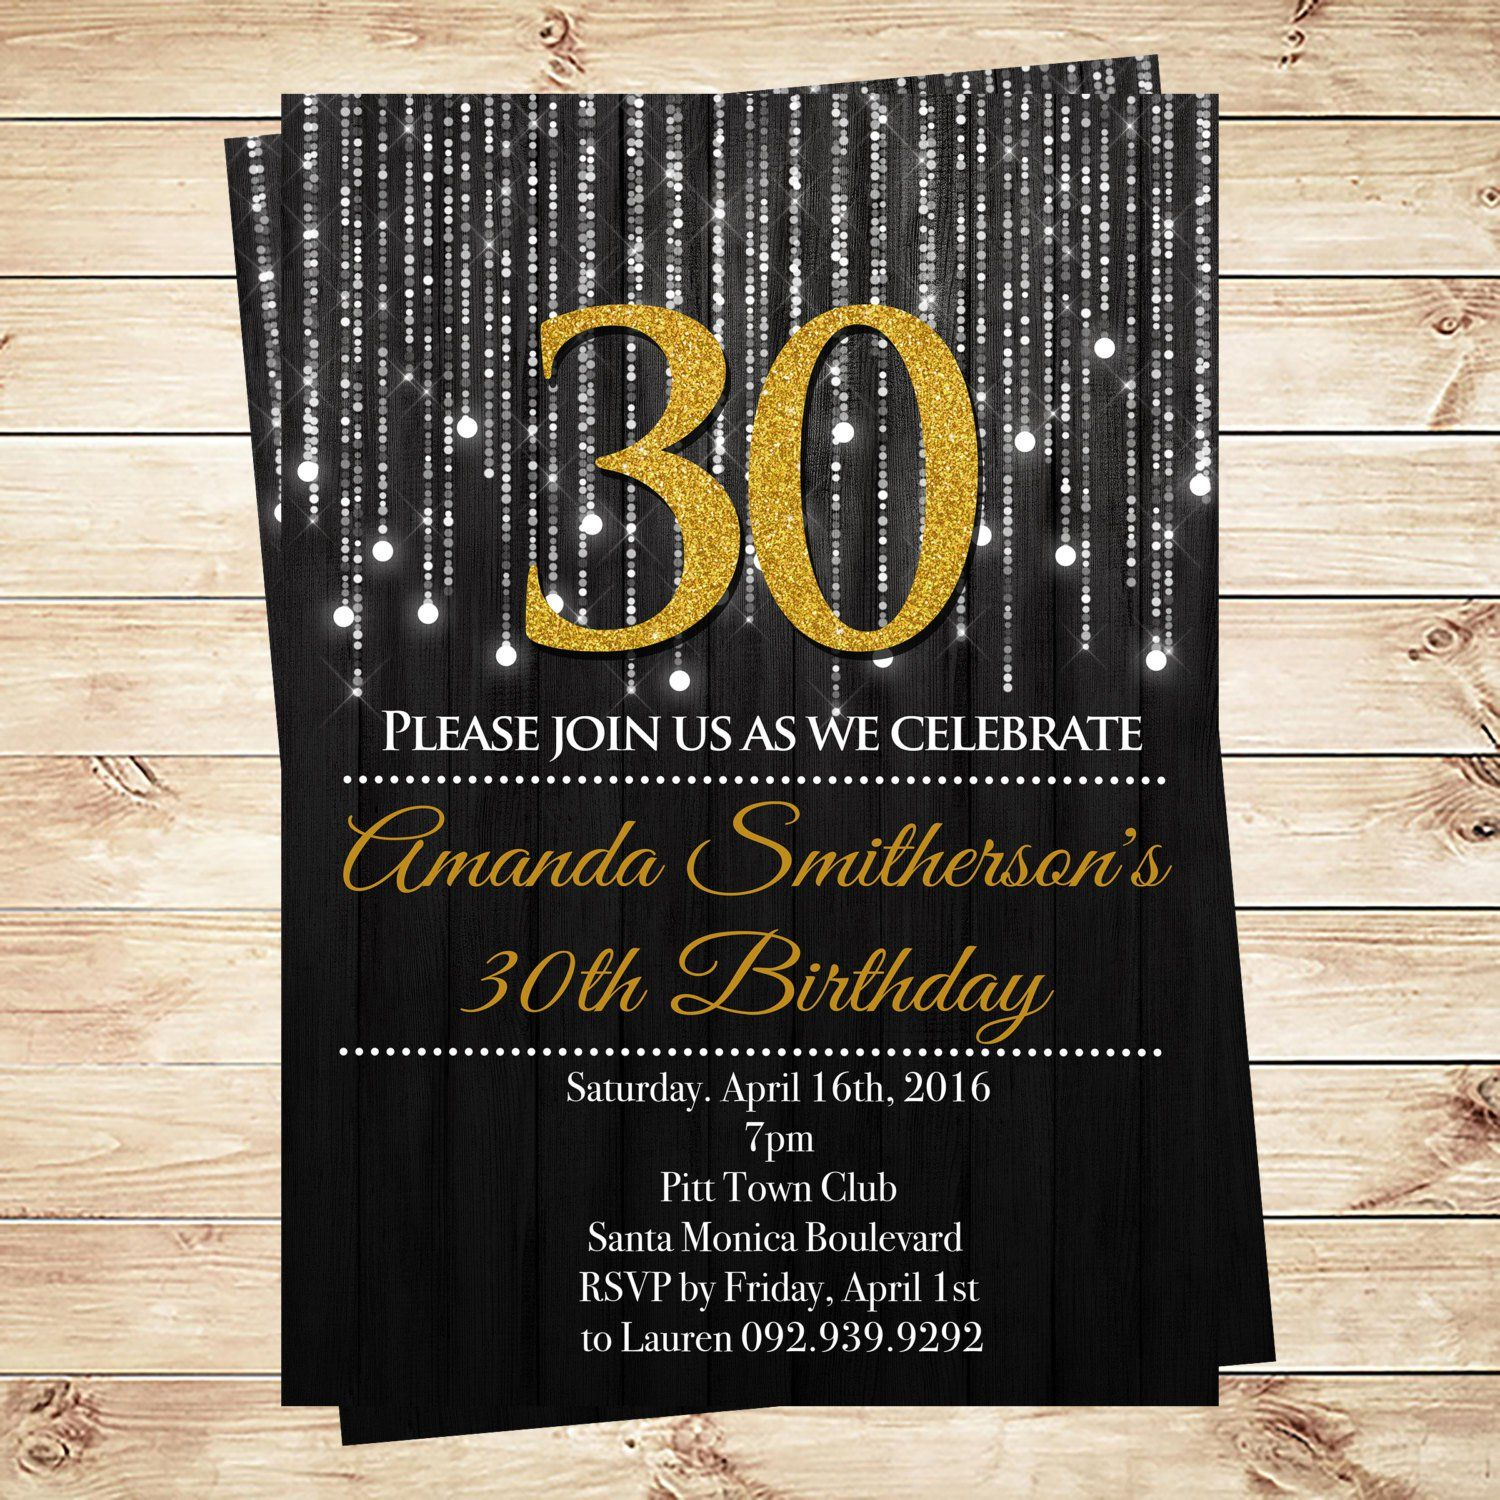 30th Birthday Invitation Templates For Her Business Template Ideas